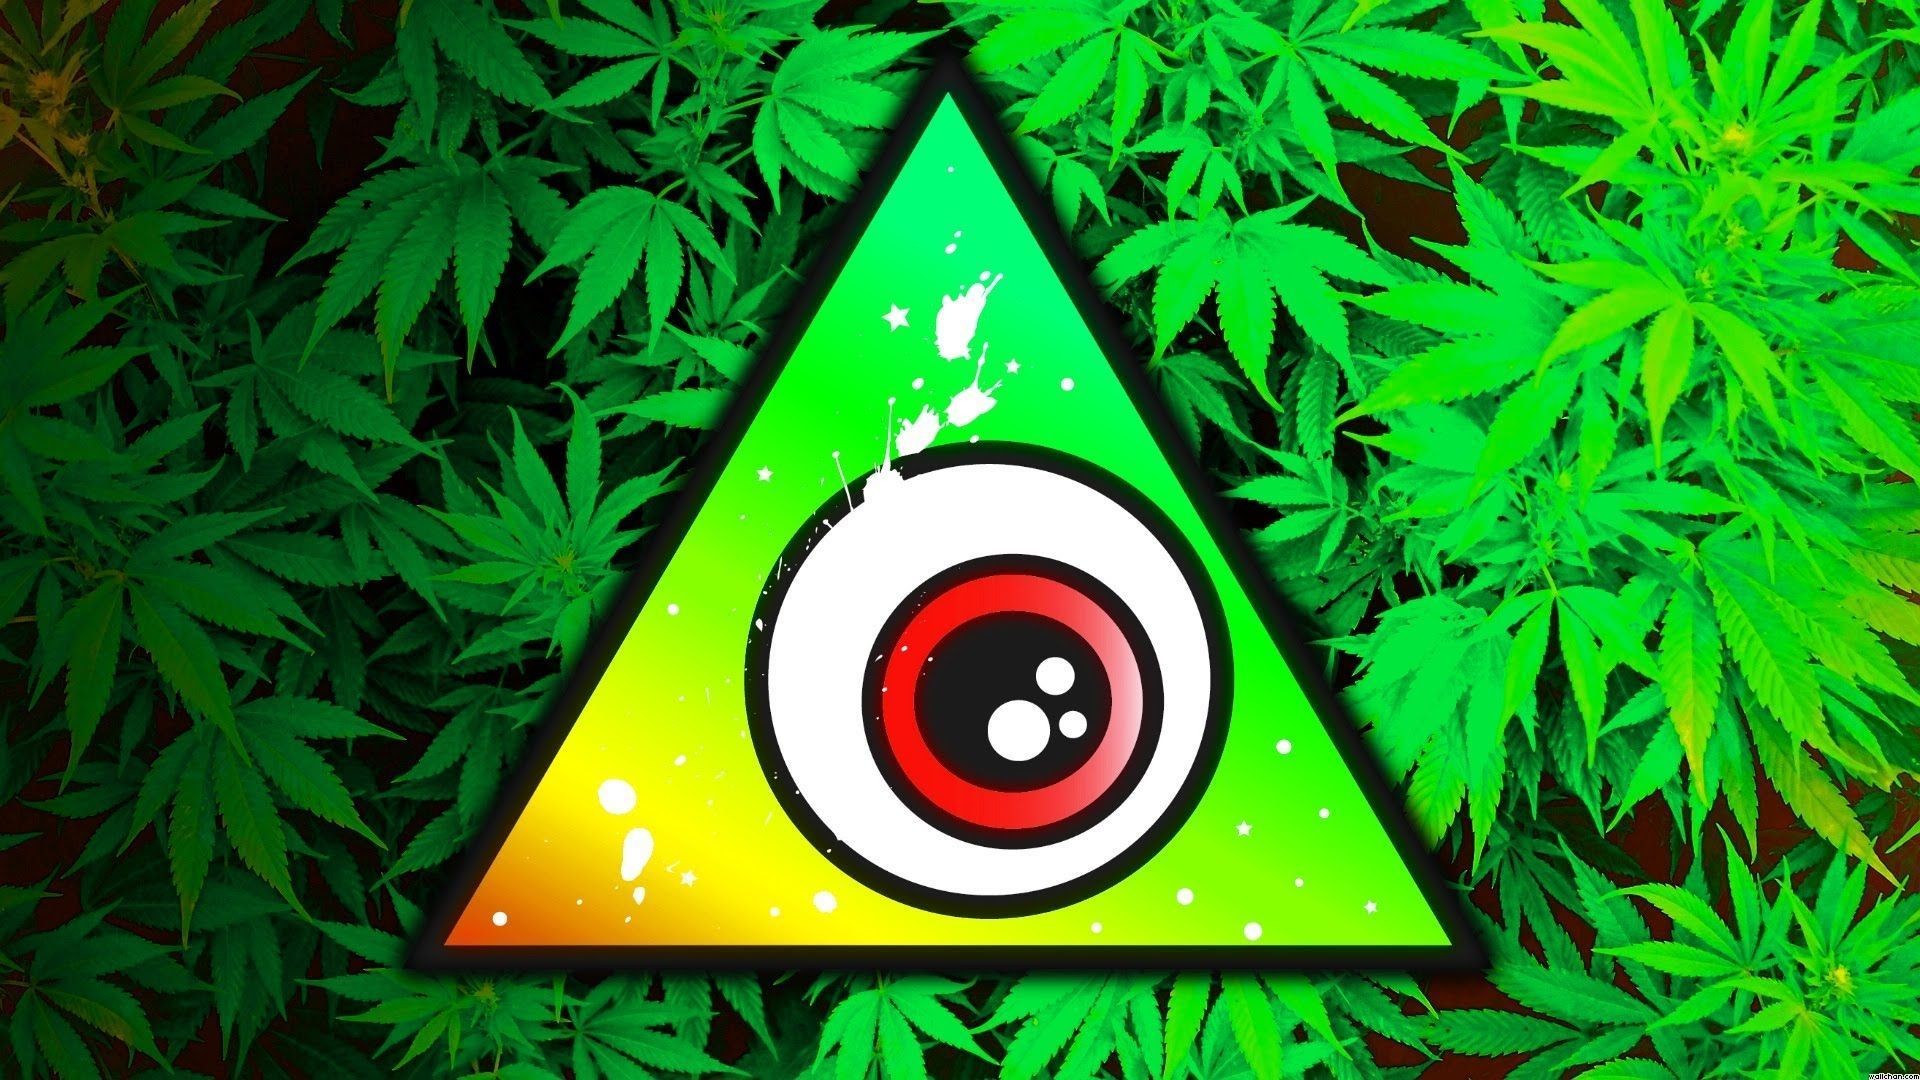 Trippy Stoner Wallpapers Gallery - 1080 X 1080 Weed - 1920x1080 Wallpaper -  